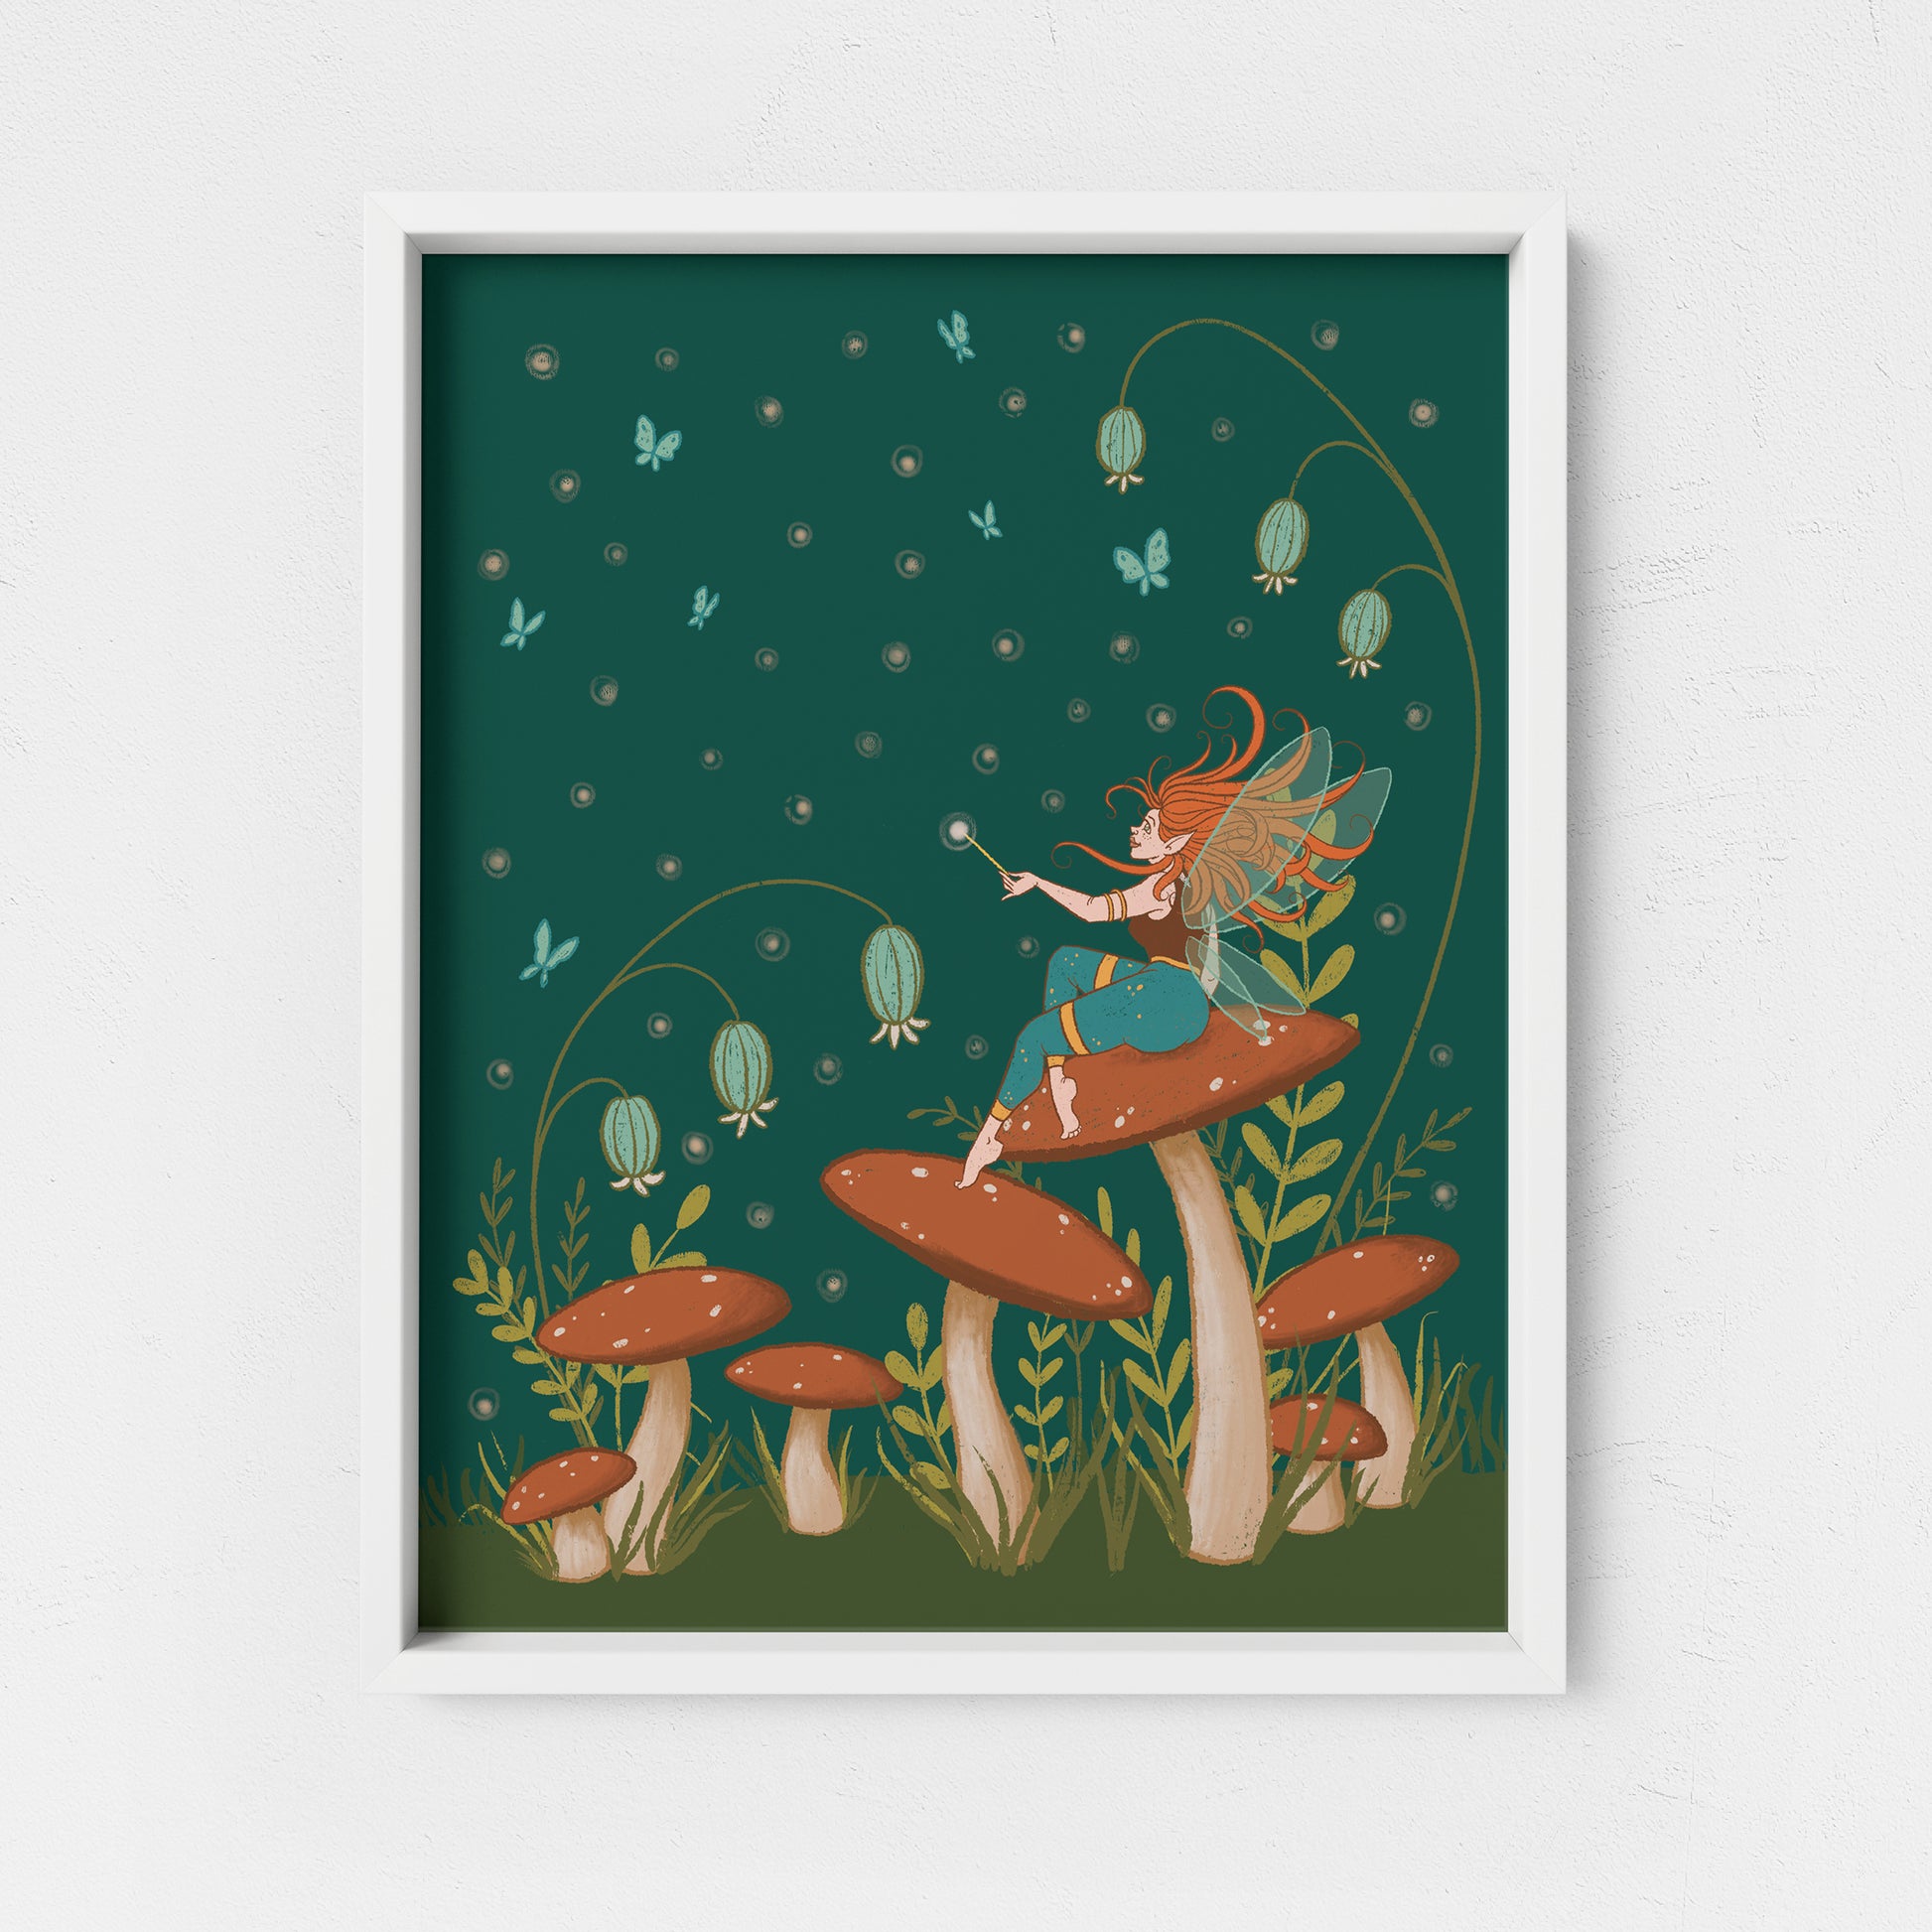 A cottagecore-style illustration shows a winged faerie with turquoise pants sits atop a red-capped mushroom in a field of mushrooms, wildflowers and blue butterflies at night. The print is in a white frame on a white background.